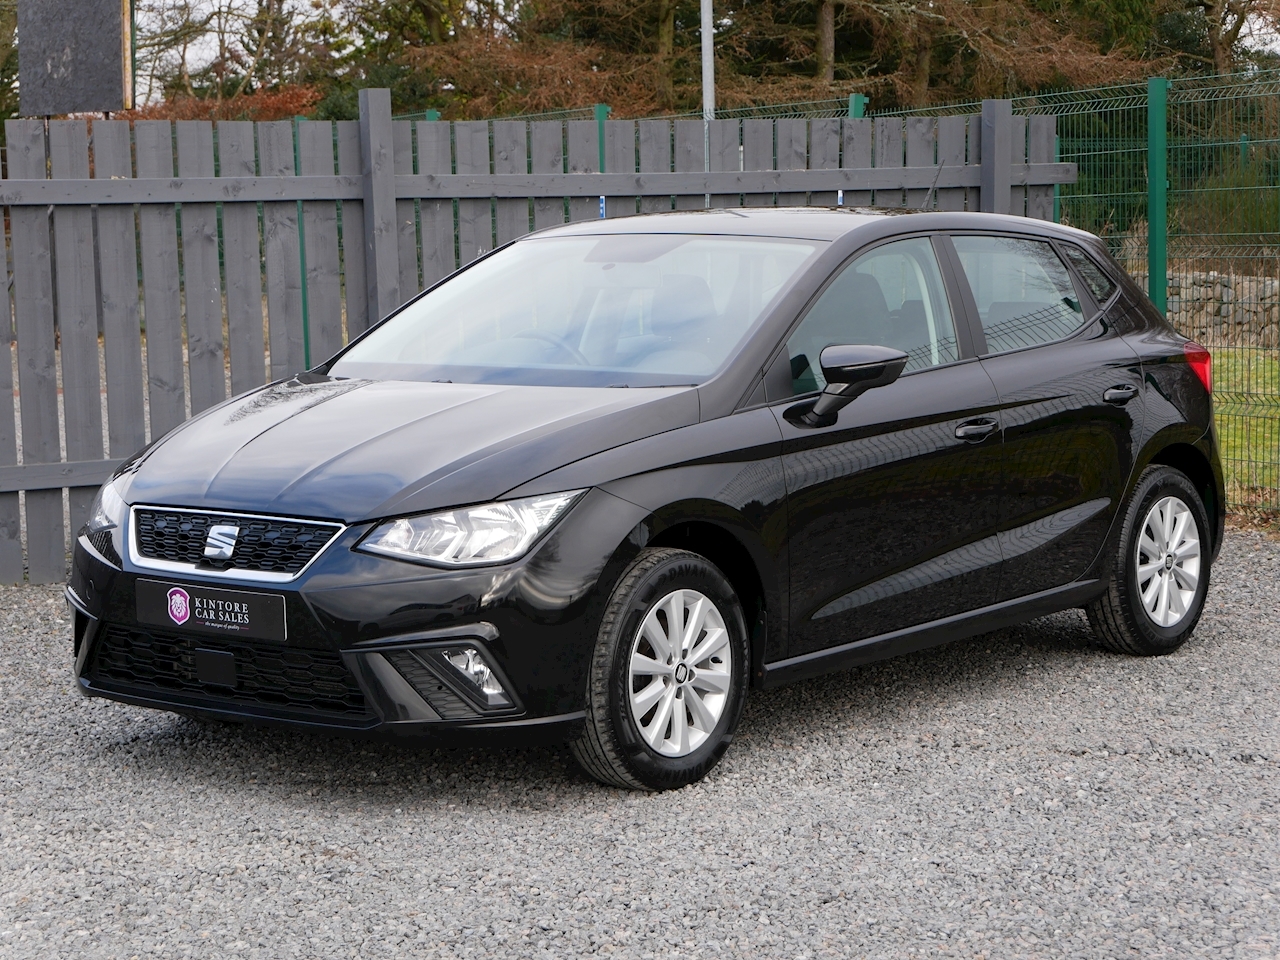 Used 2018 SEAT Ibiza 1.0 MPI SE 5dr, Manual For Sale in 